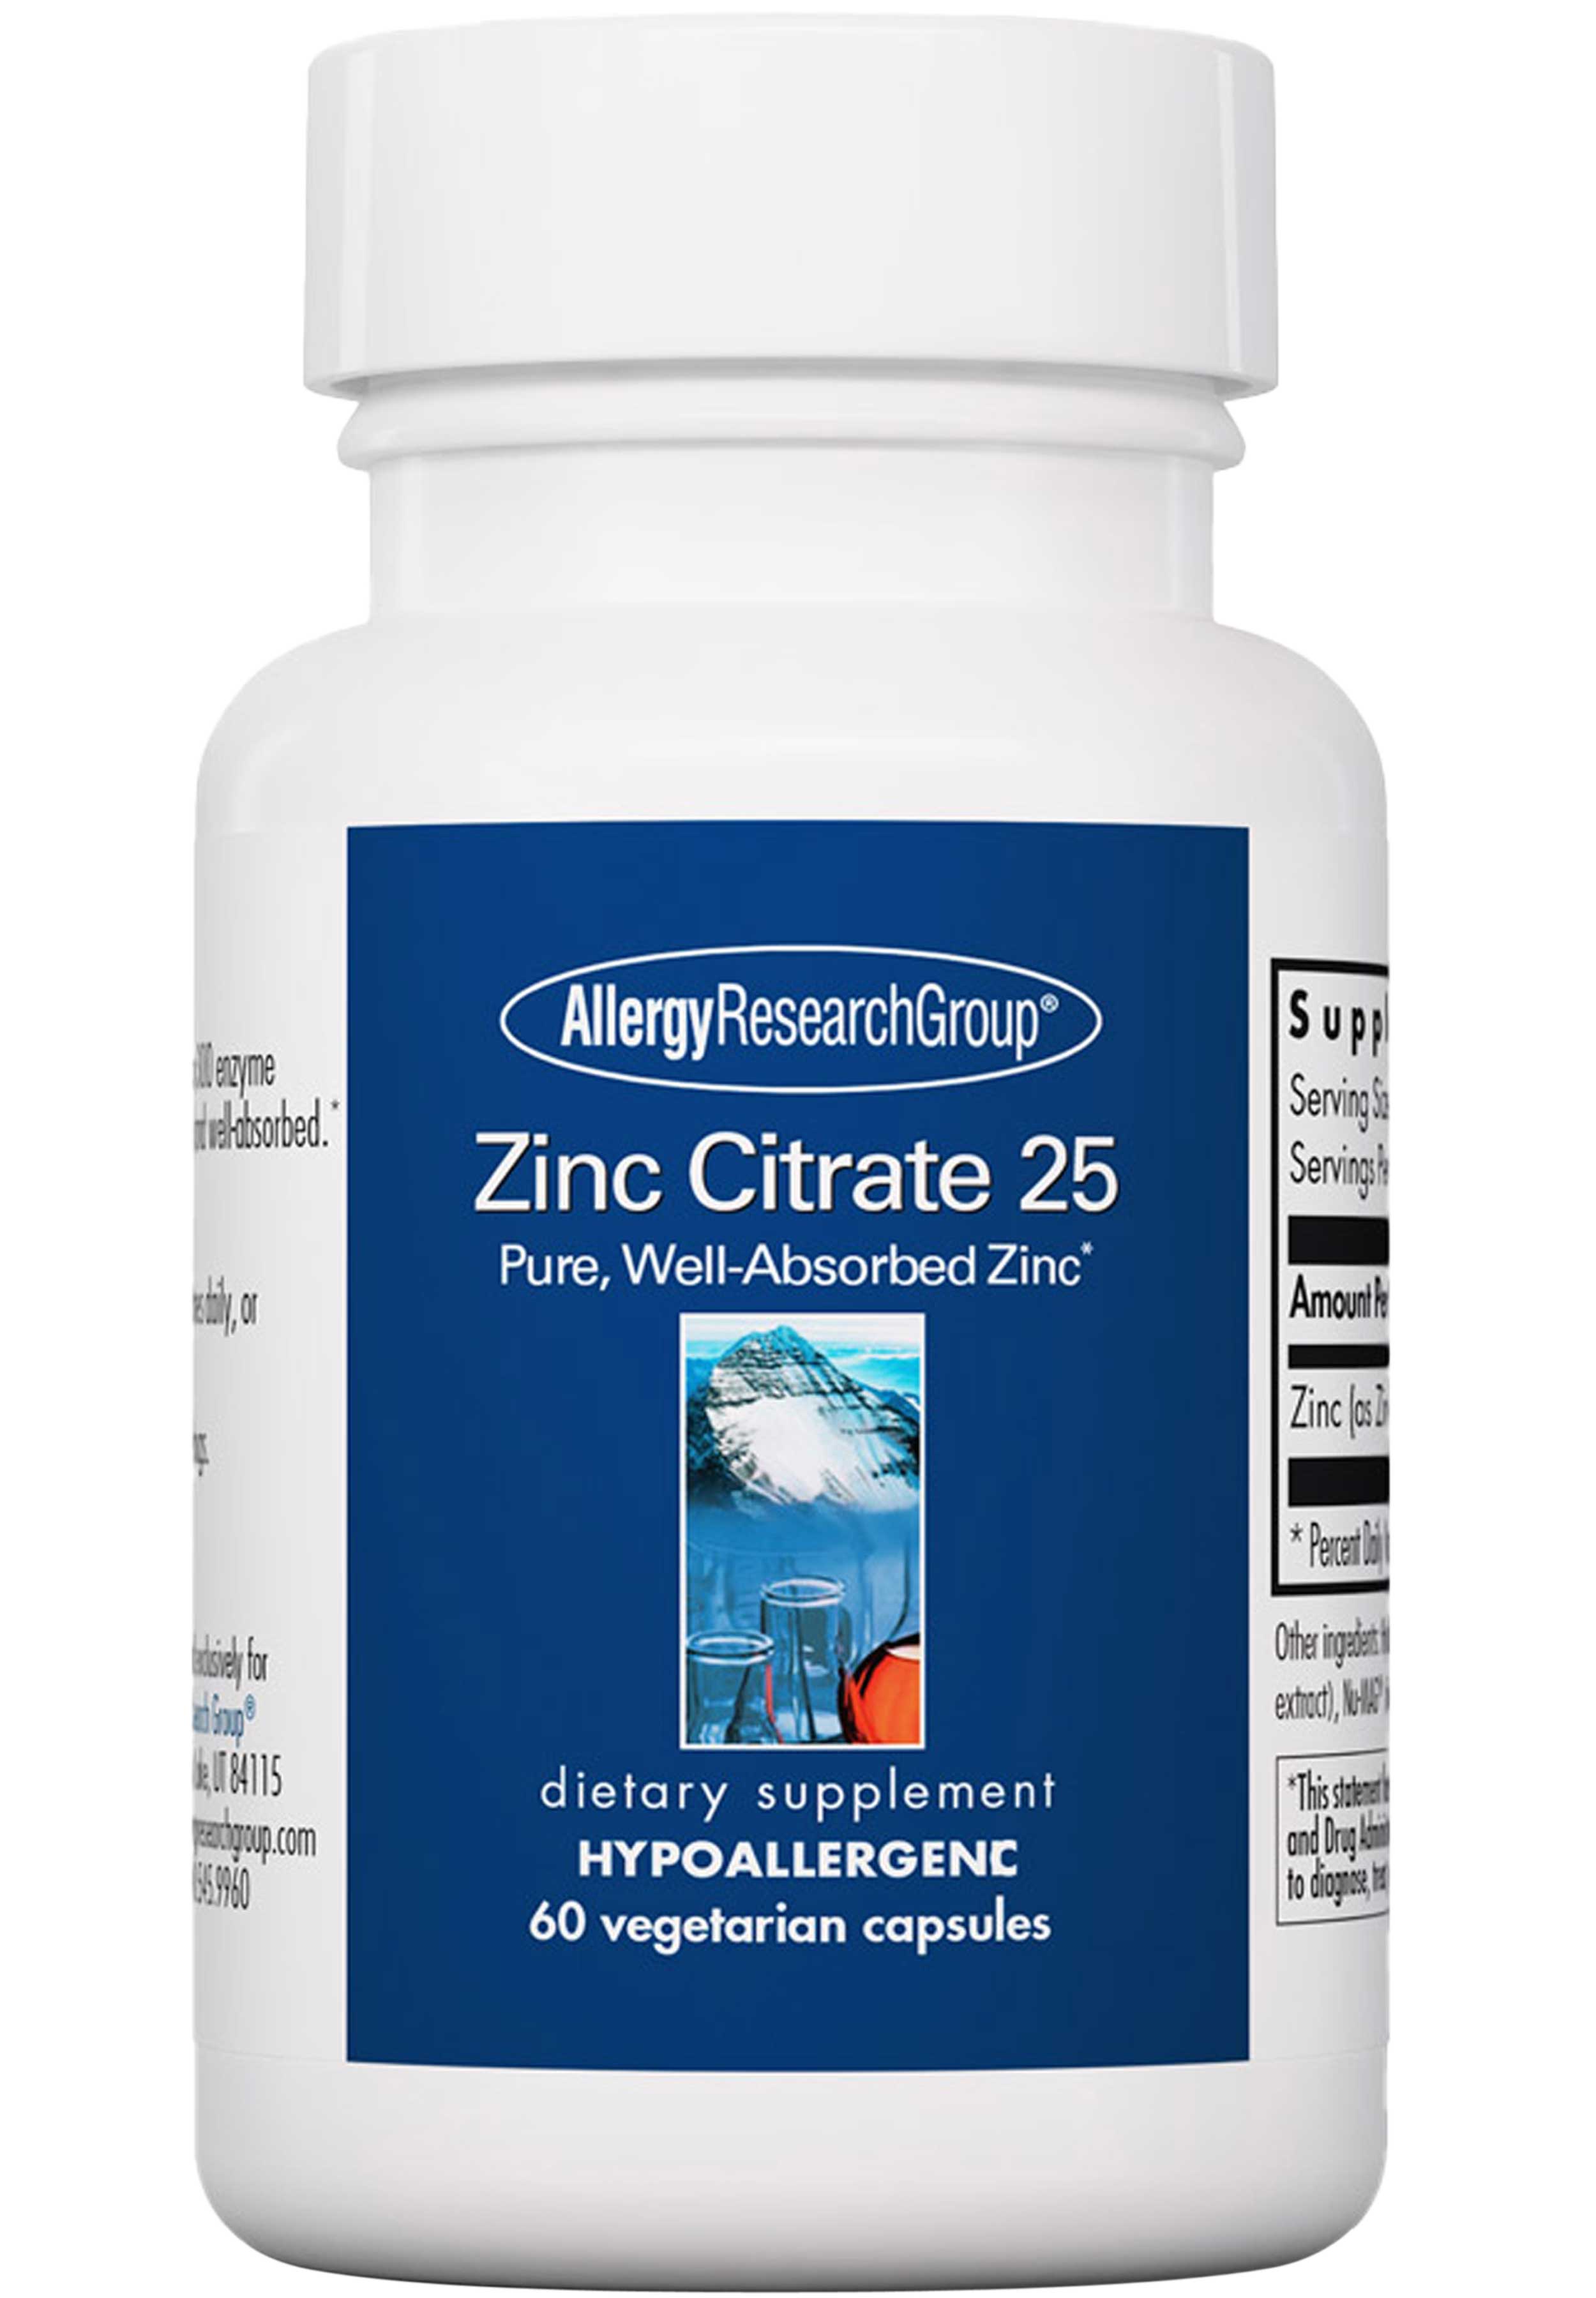 Allergy Research Group Zinc Citrate 25